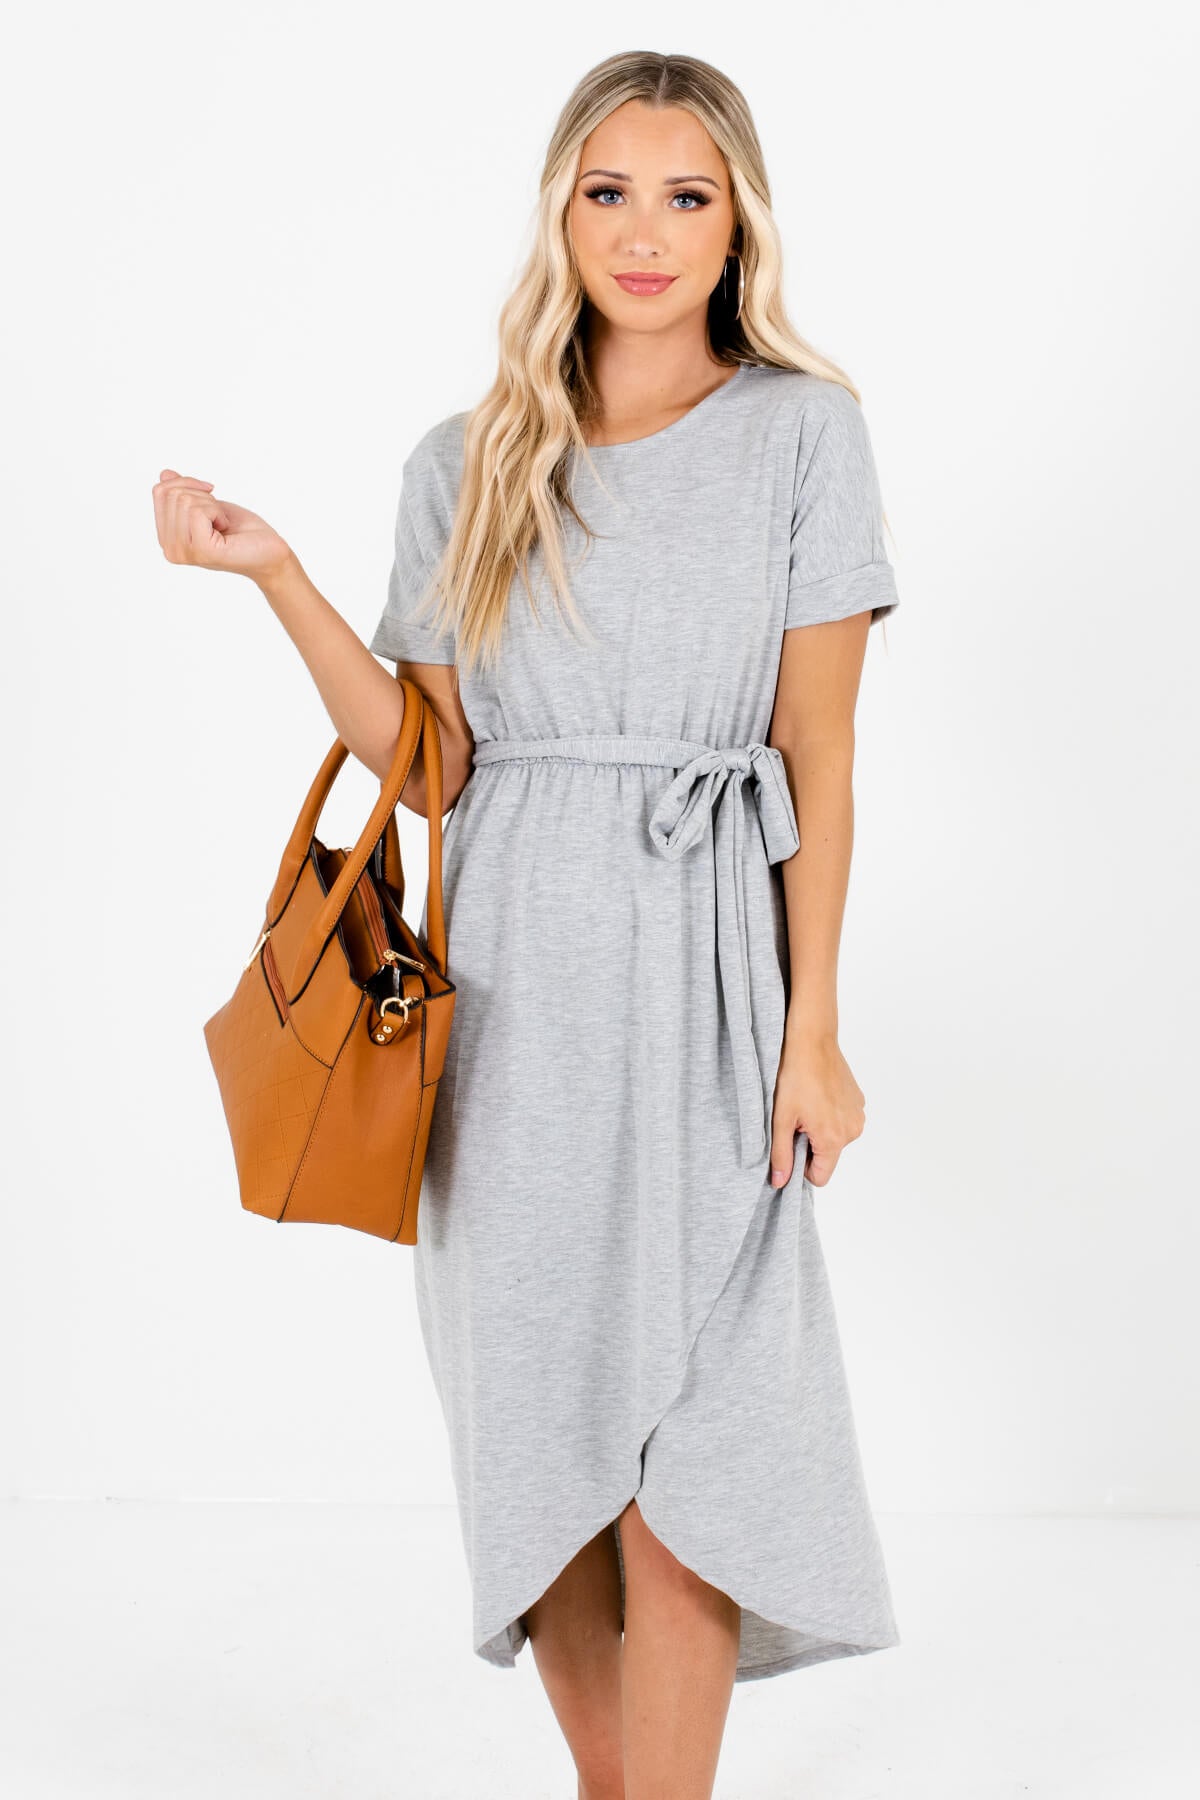 Heather Gray Faux Wrap Style Boutique Knee-Length Dresses for Women